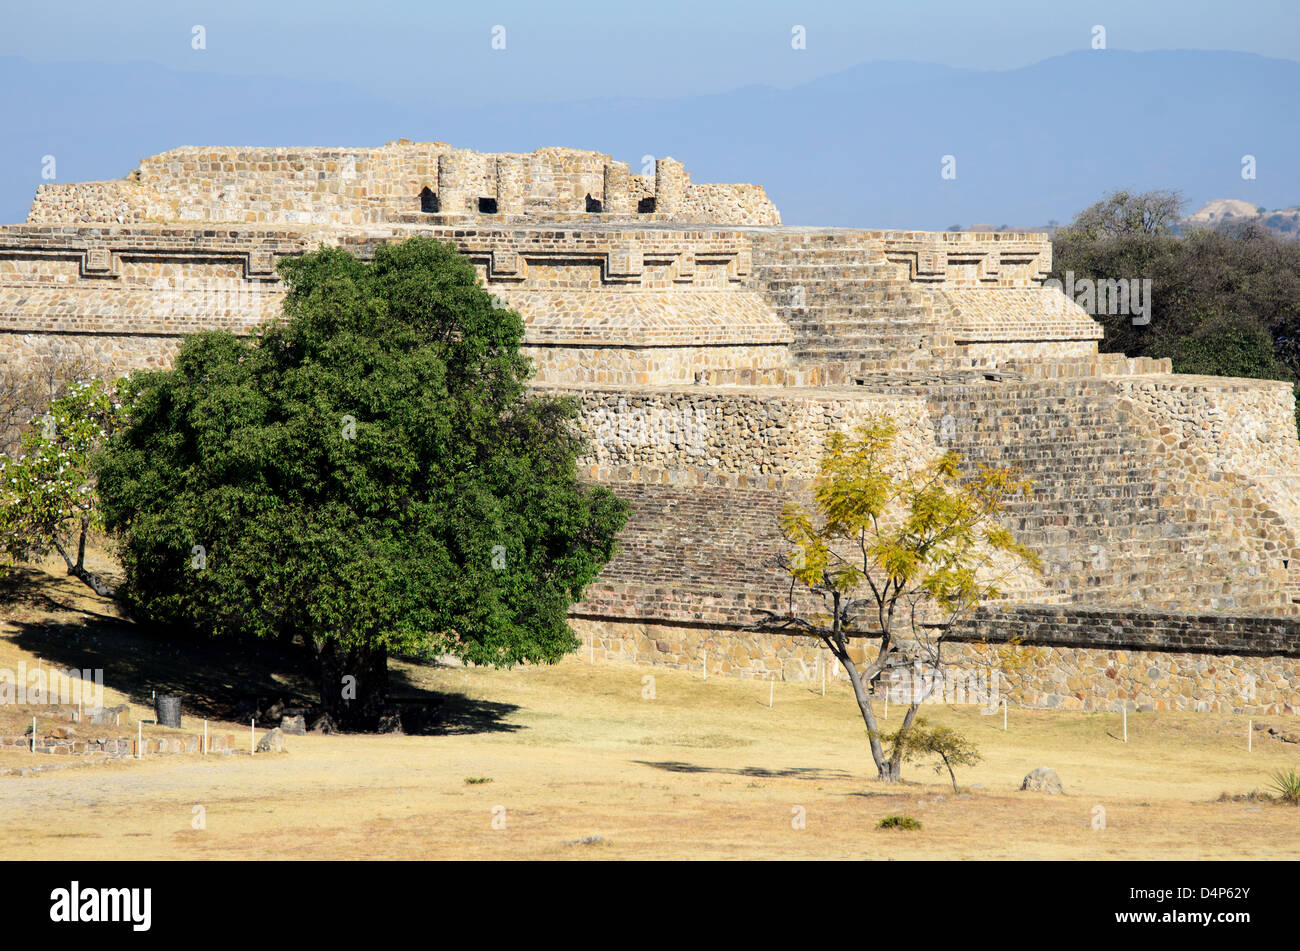 Building IV, a stepped pyramid temple complex at the Zapotec archaeological site of Monte Alban, Oaxaca, Mexico. Stock Photo